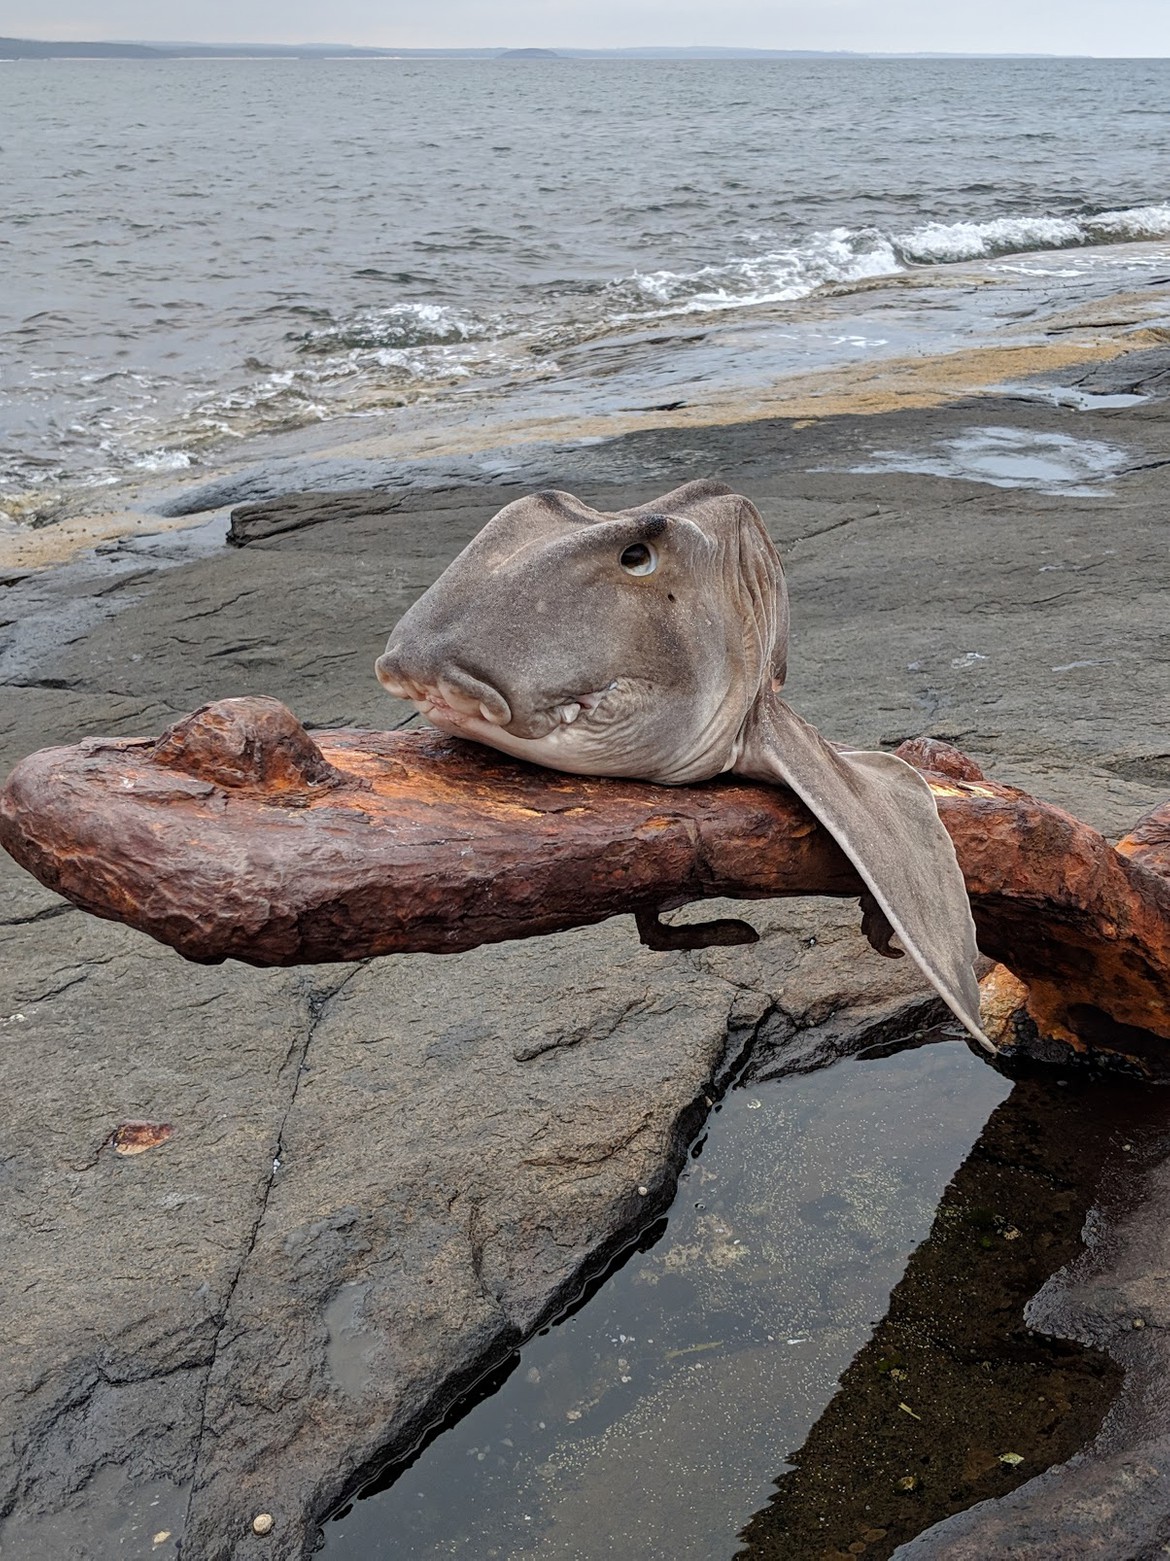 A crested horn shark that was caught off Bawley point the previous day, with its head resting on a piece of rusty metal. 